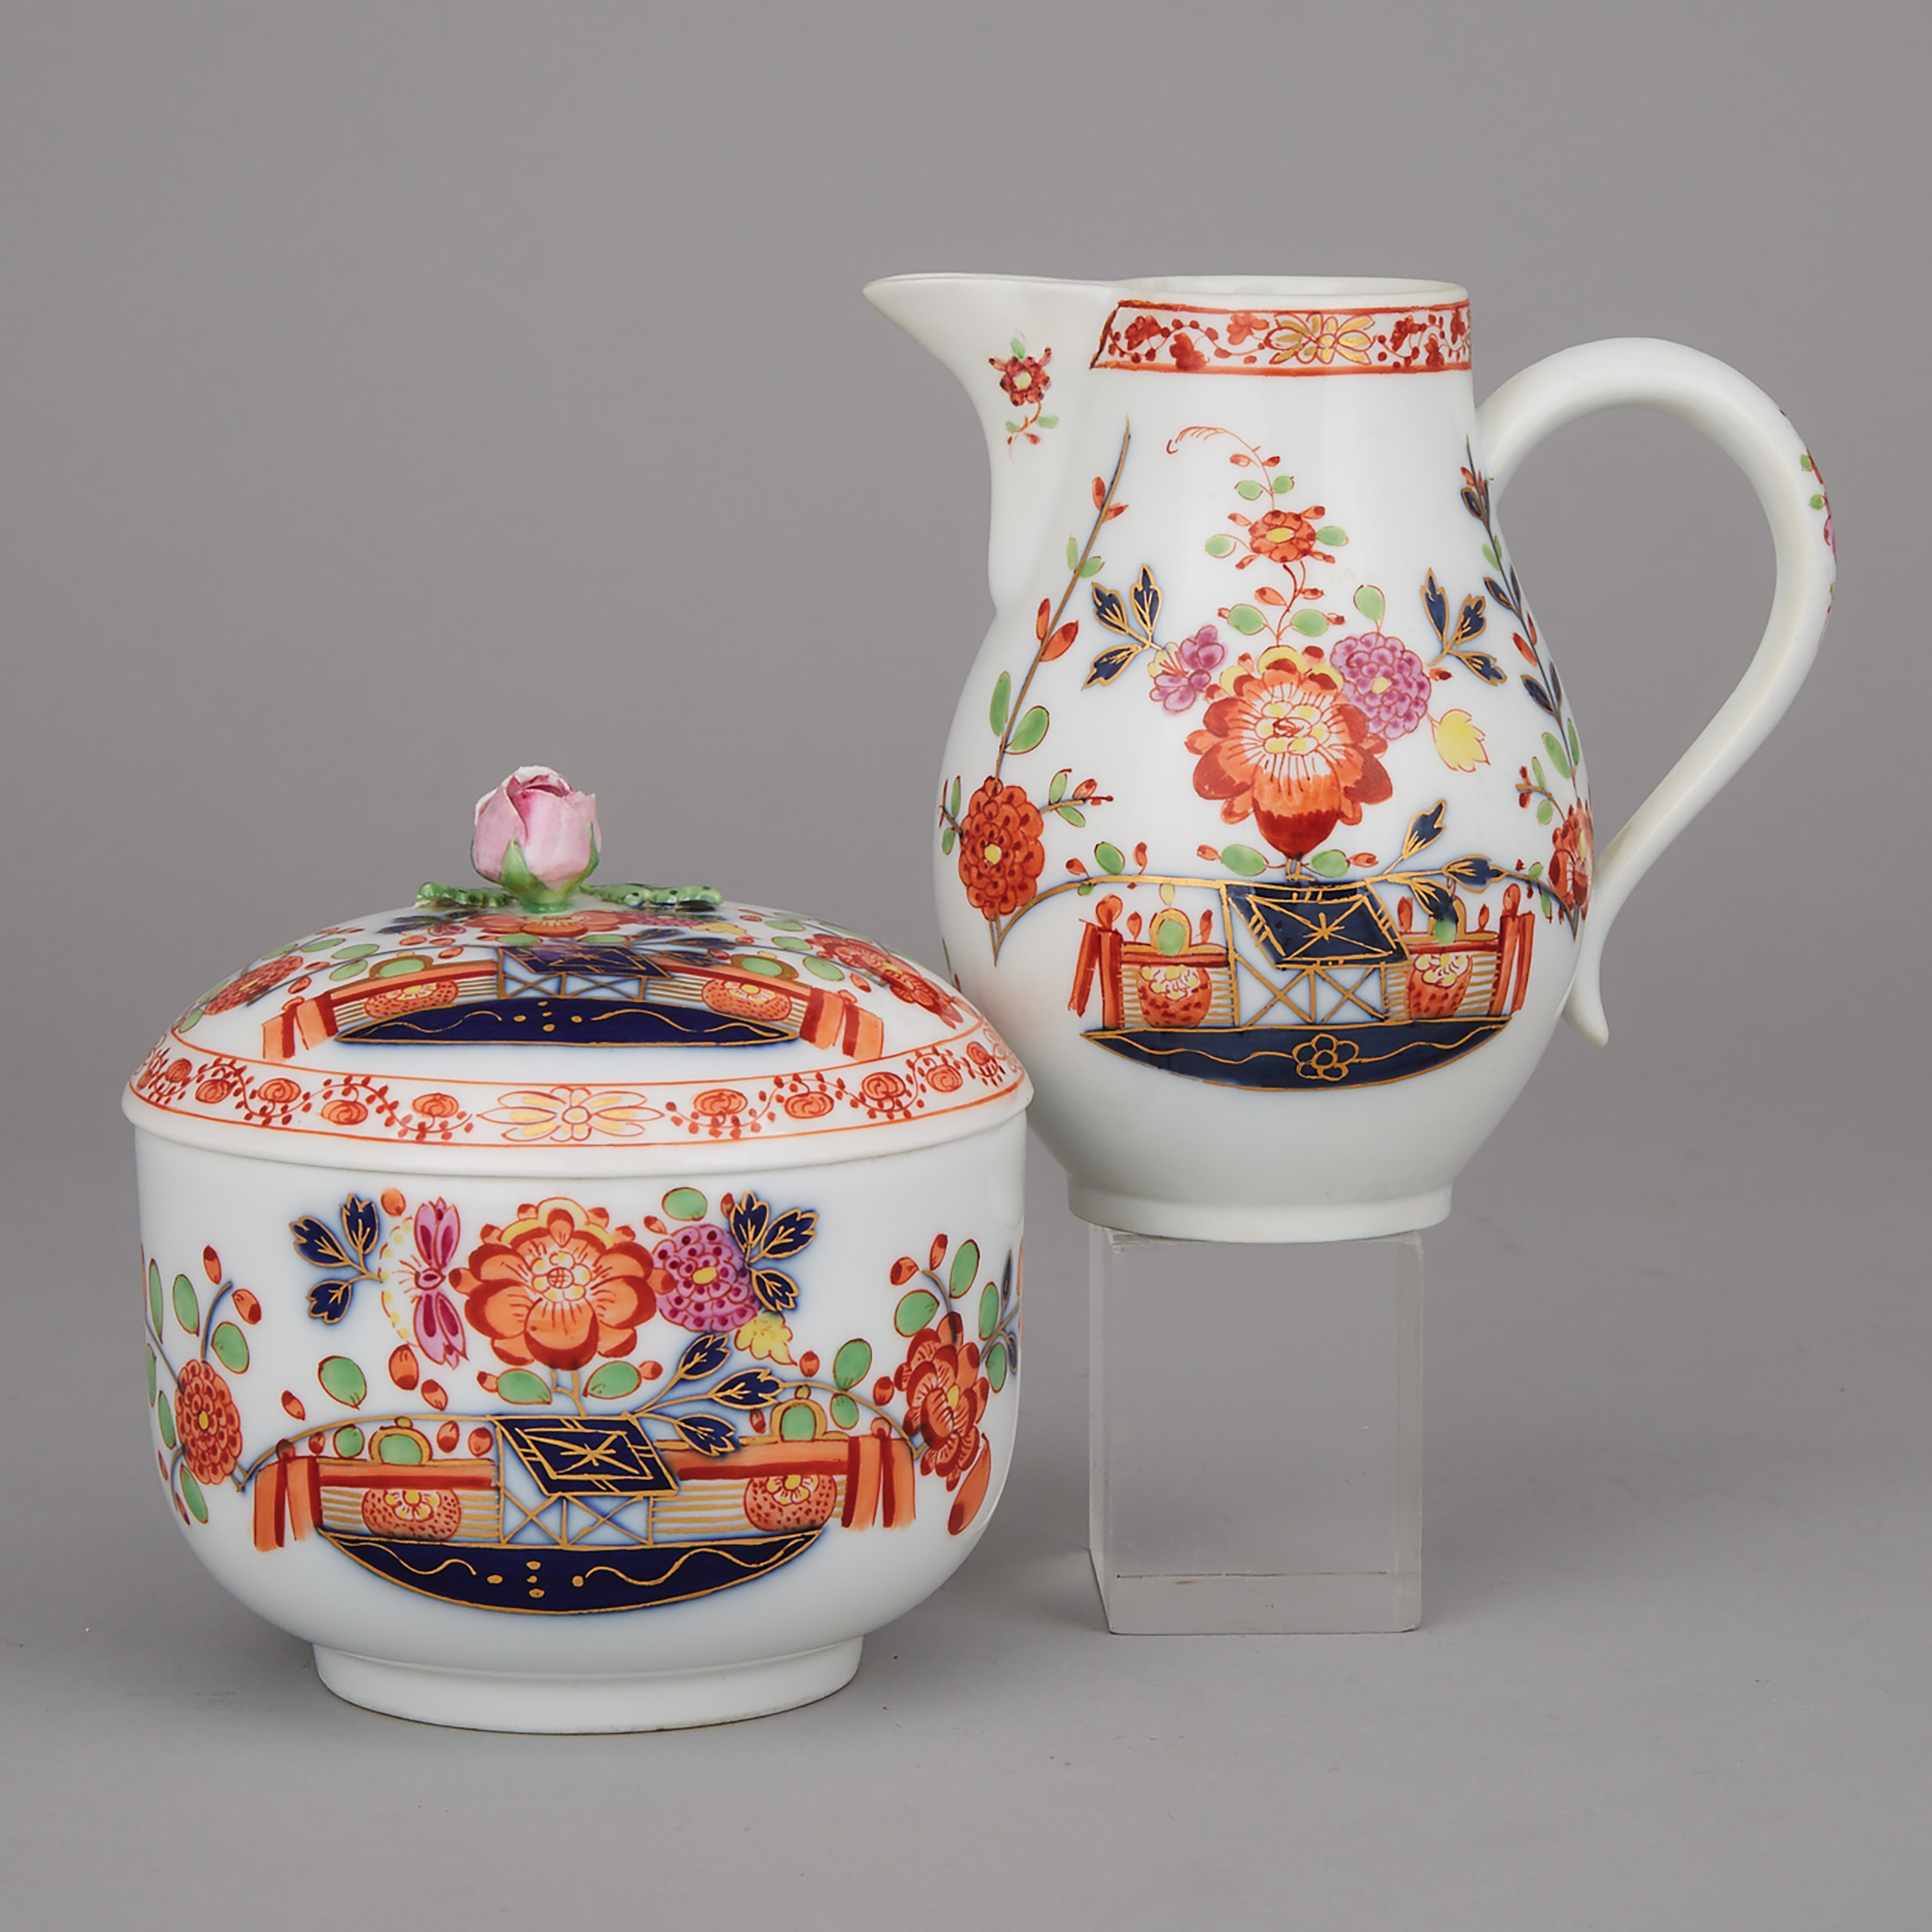 Meissen ‘Tischenmuster’ Pattern Cream Jug and Covered Sugar Bowl, c.1774-1800 and later